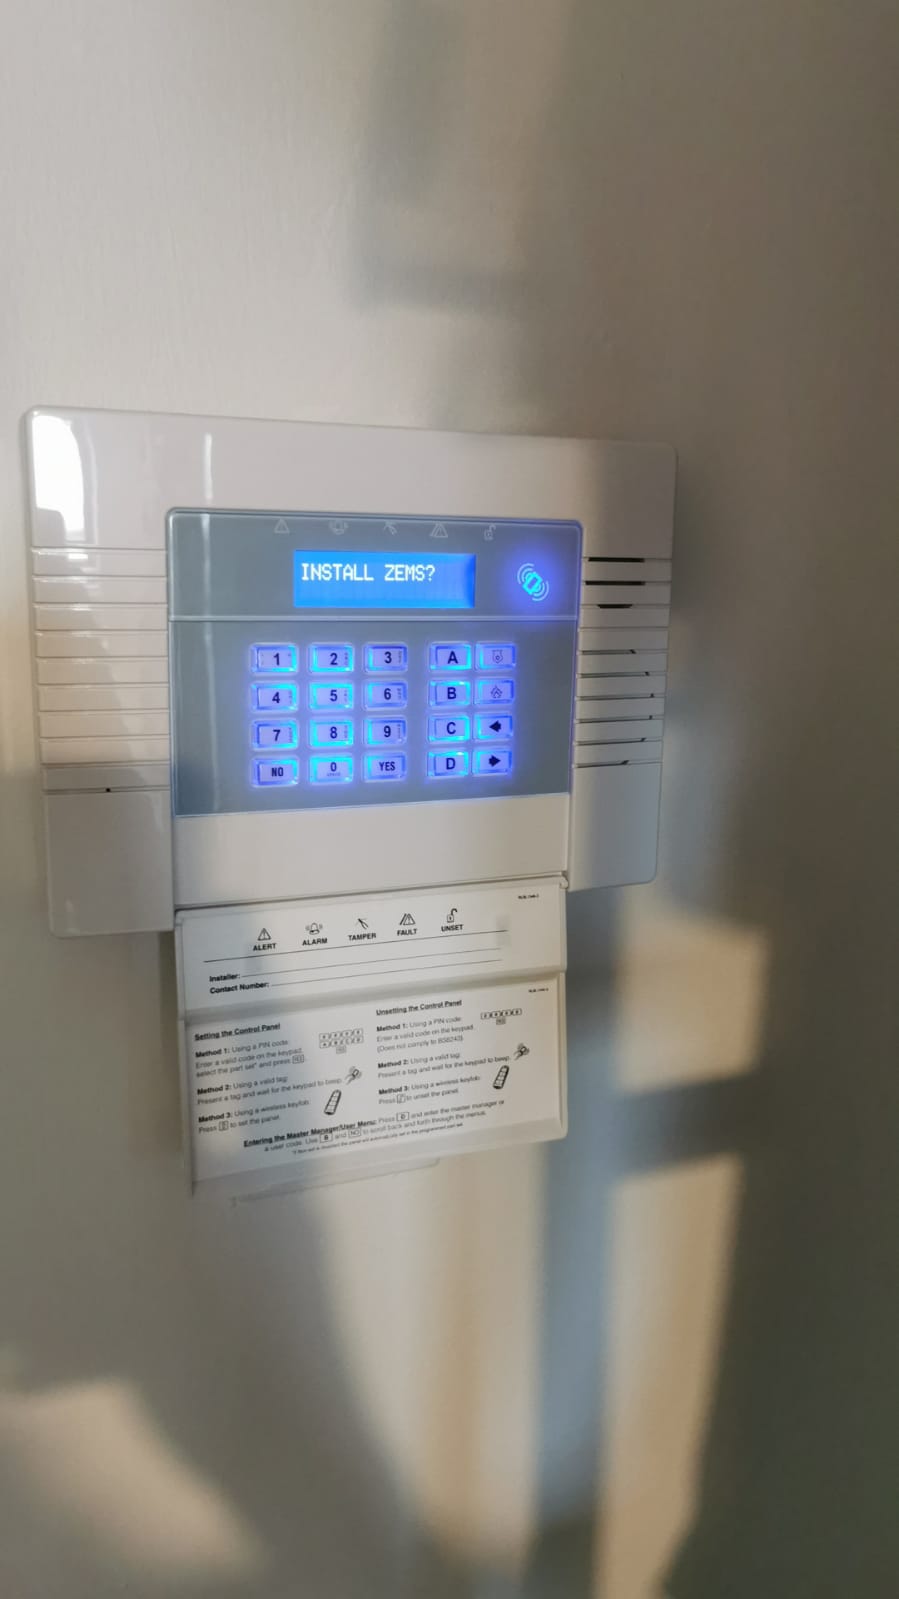 Alarm keypad for access control in white